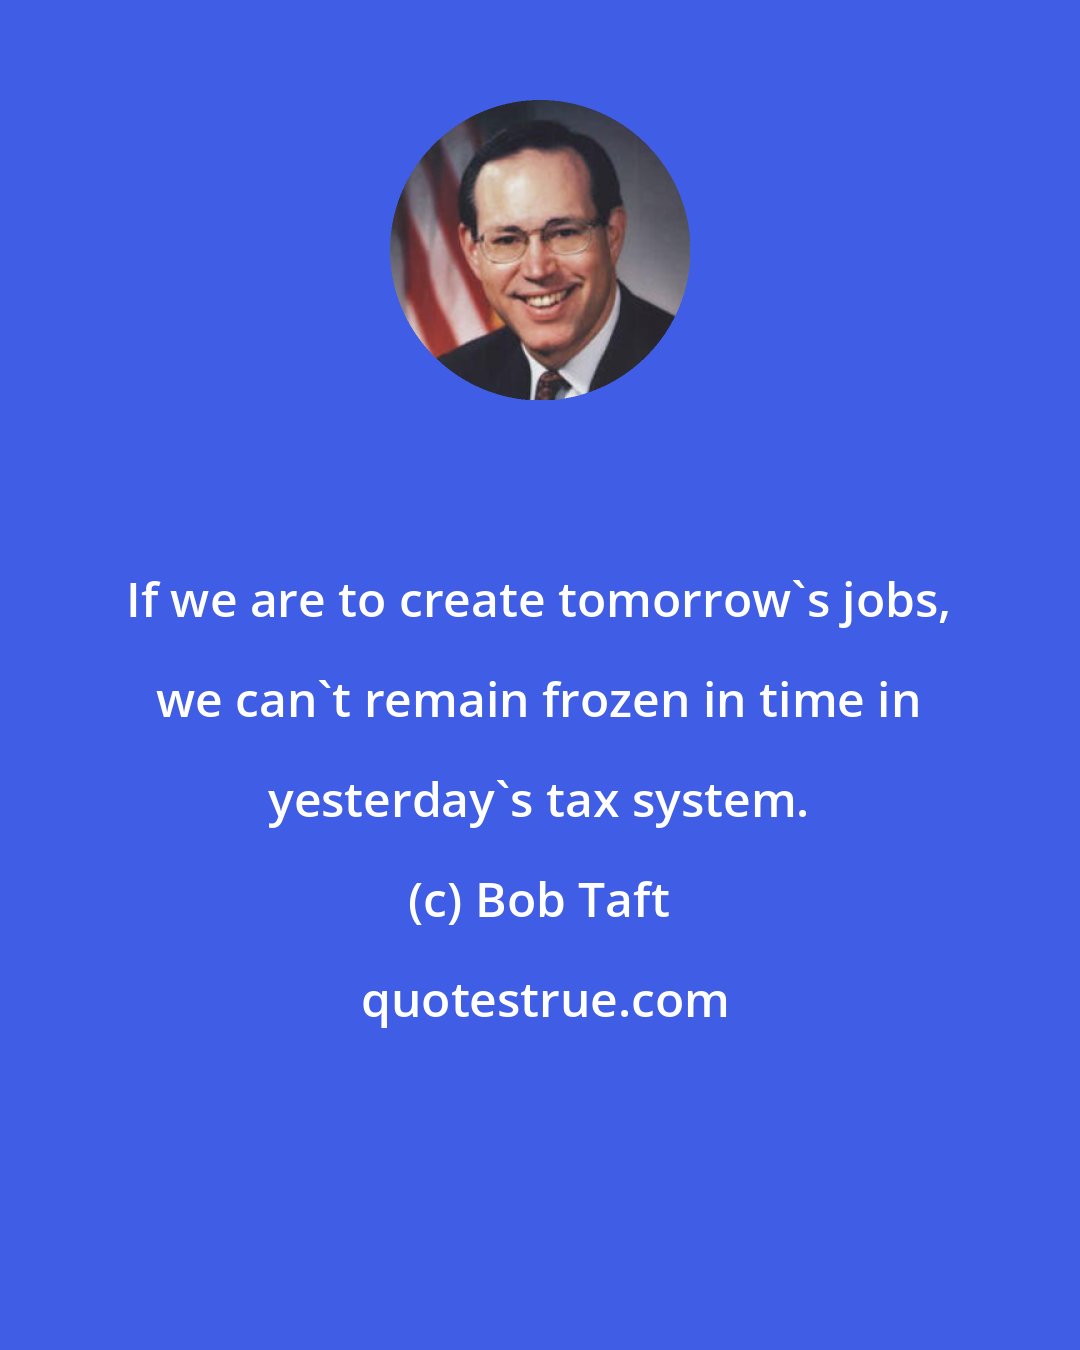 Bob Taft: If we are to create tomorrow's jobs, we can't remain frozen in time in yesterday's tax system.